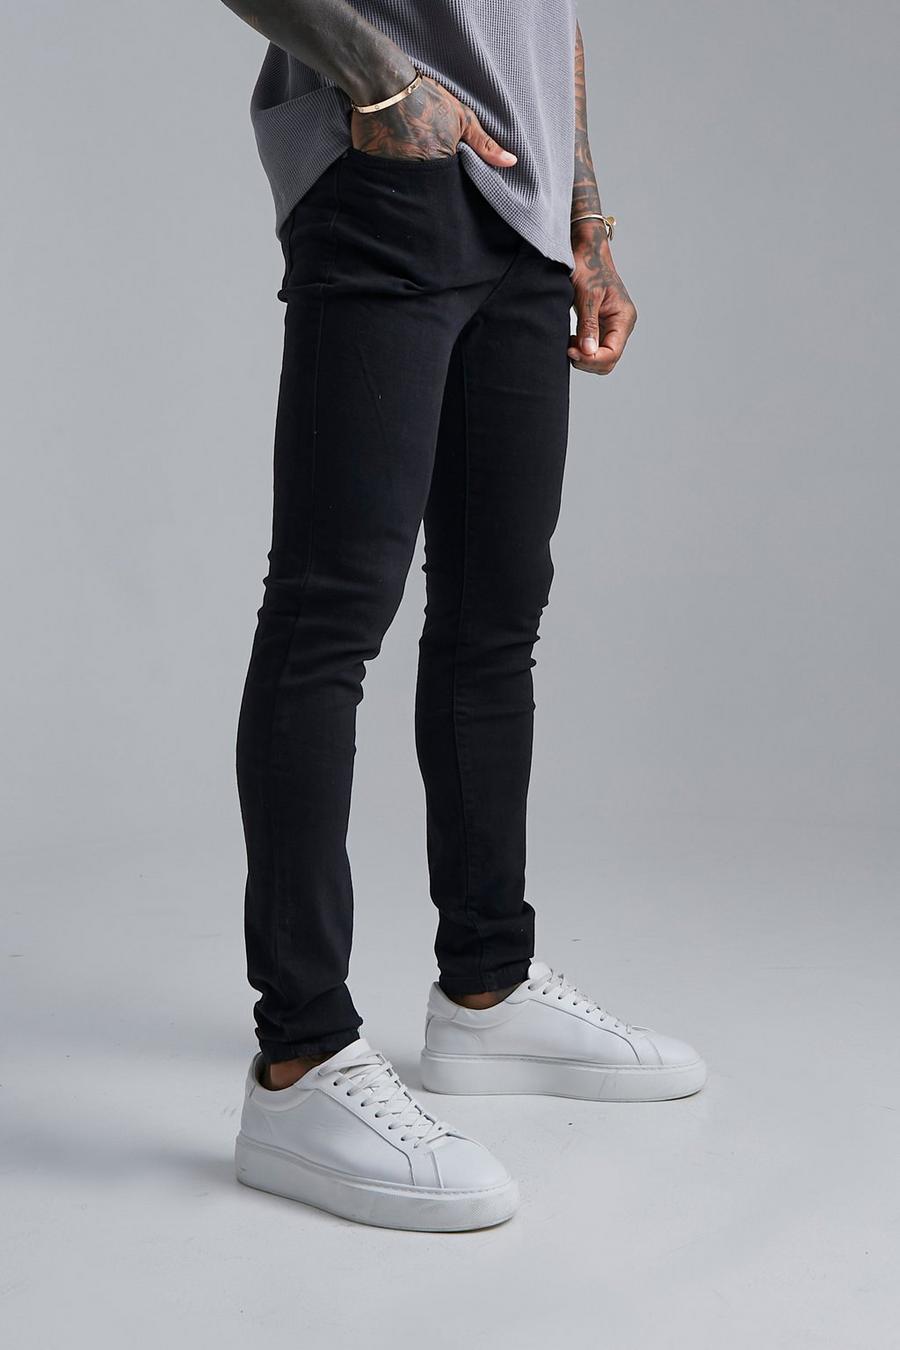 True black Skinny Stretch Jean Contains Recycled Polyester